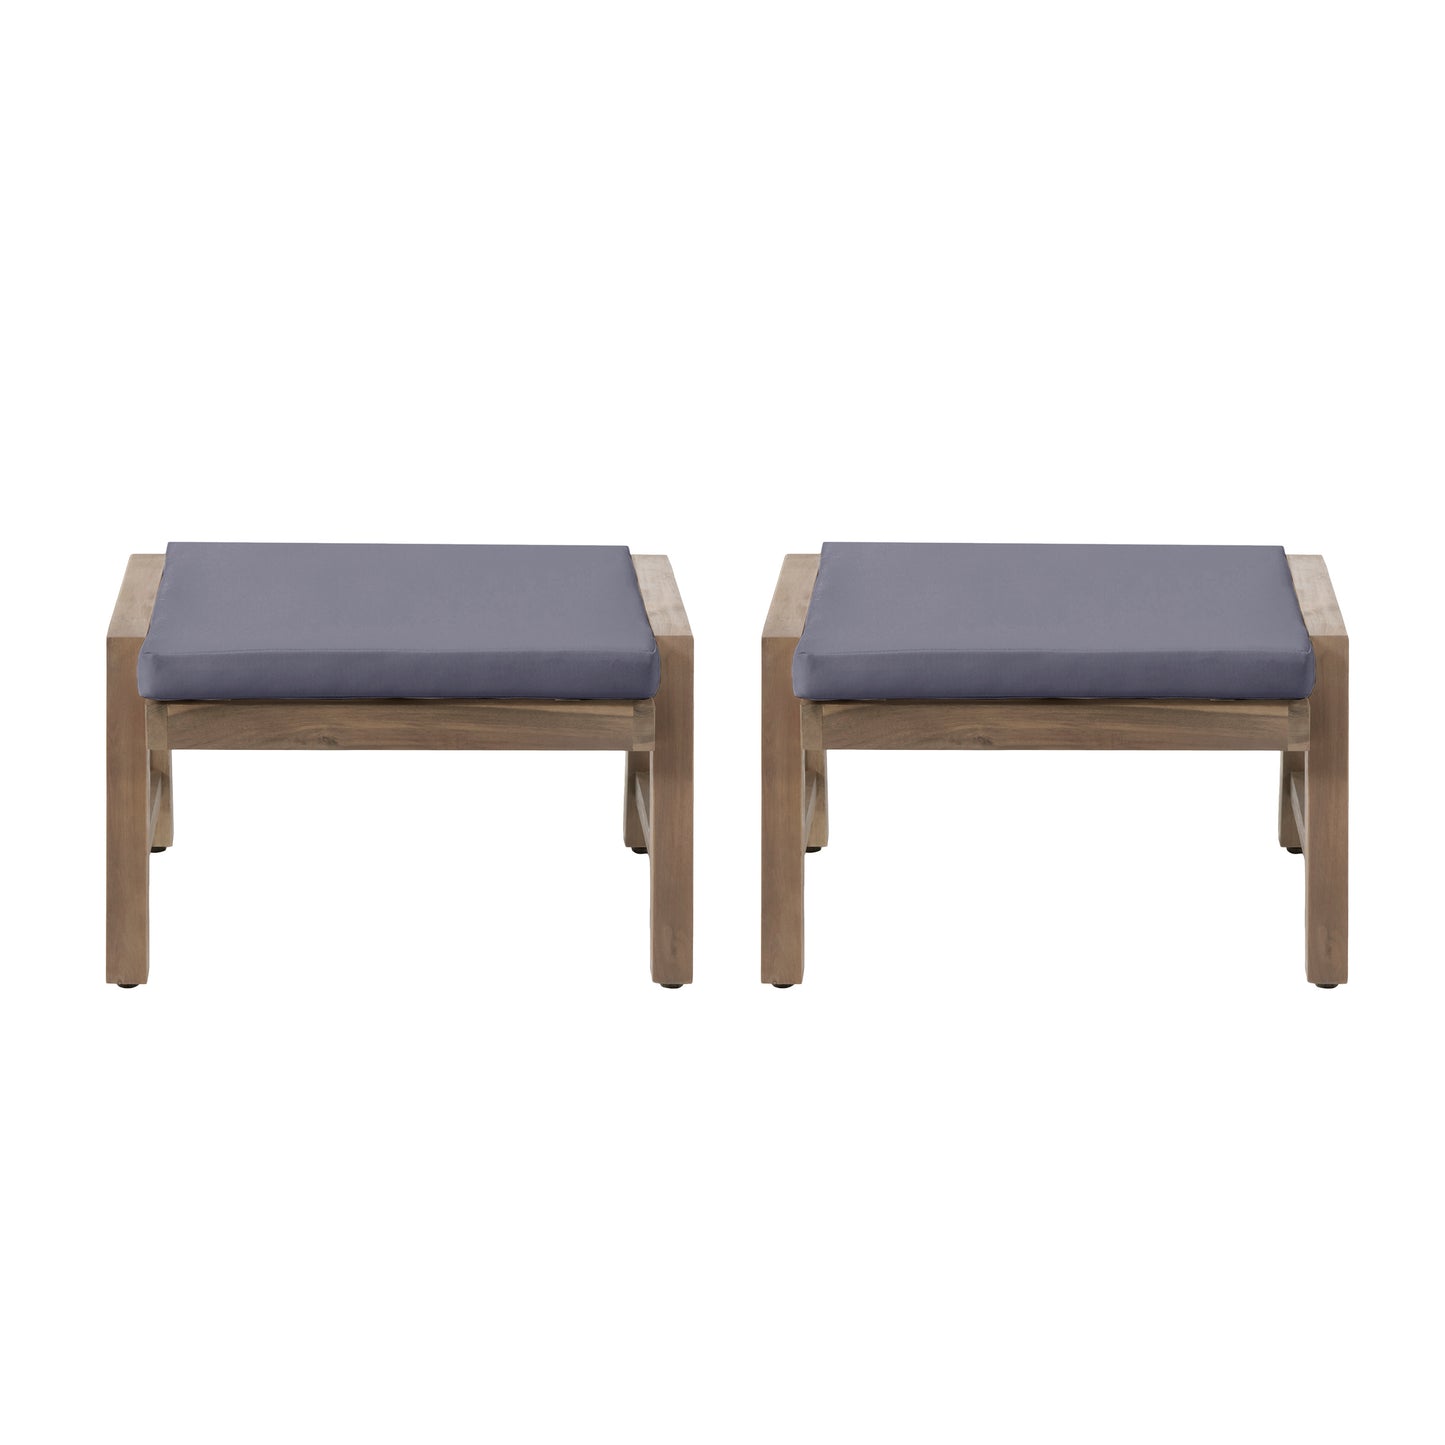 Avacyn Outdoor Acacia Wood Ottomans with Cushion, Set of 2